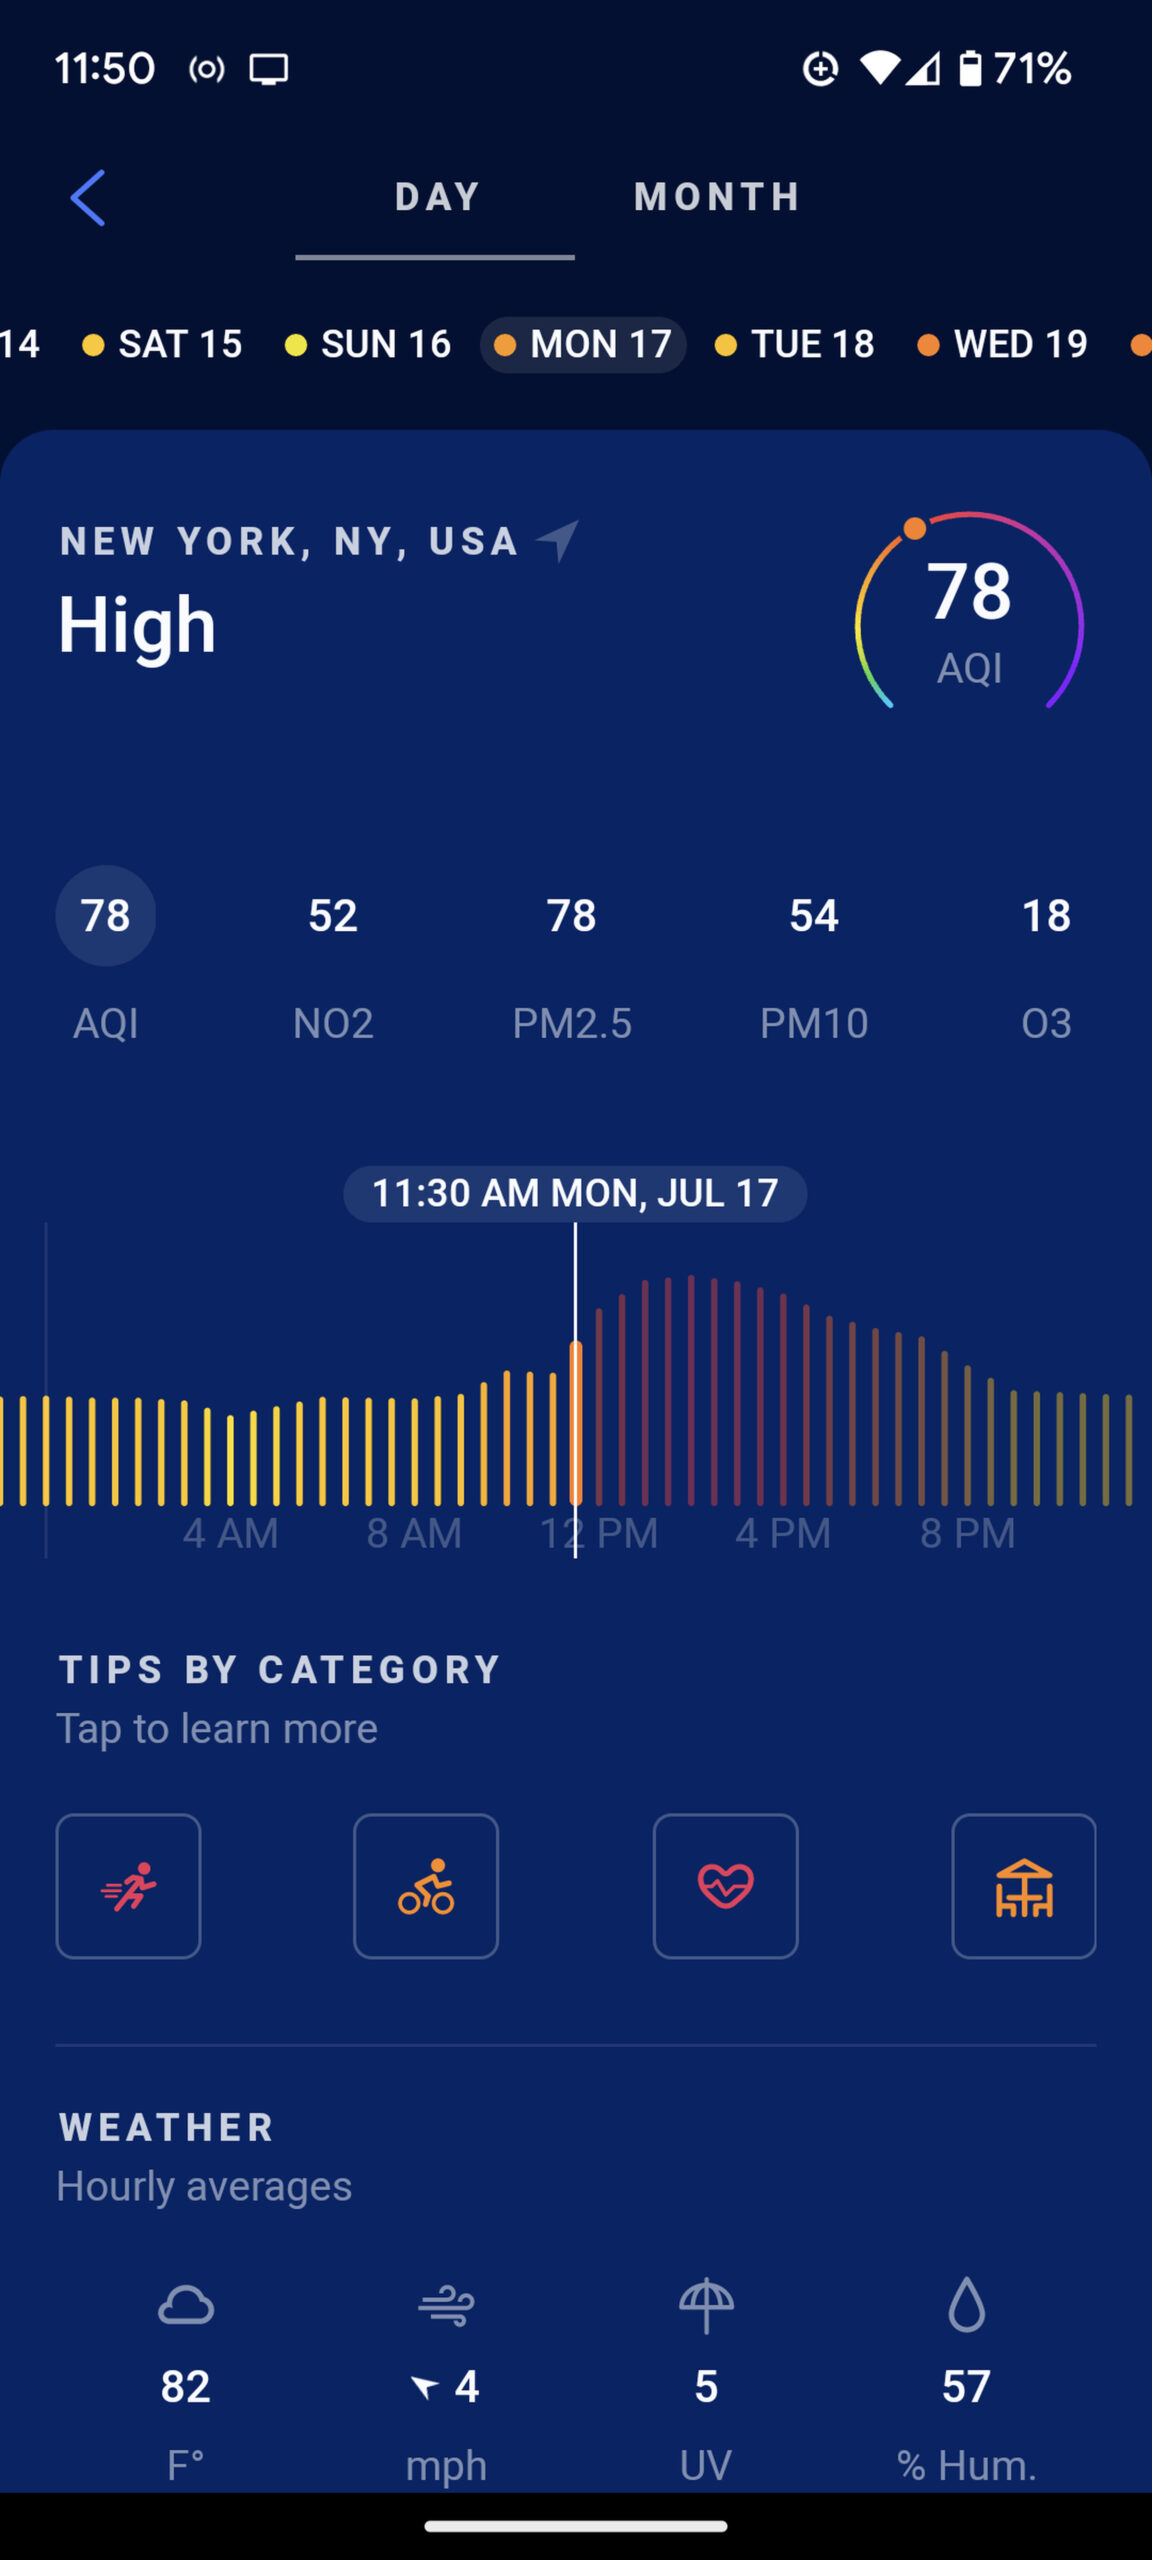 App with dark blue background saying High on top with dial rating, ratings for different substances below that, an hour-by-hour rating below that, and tips by category below that.